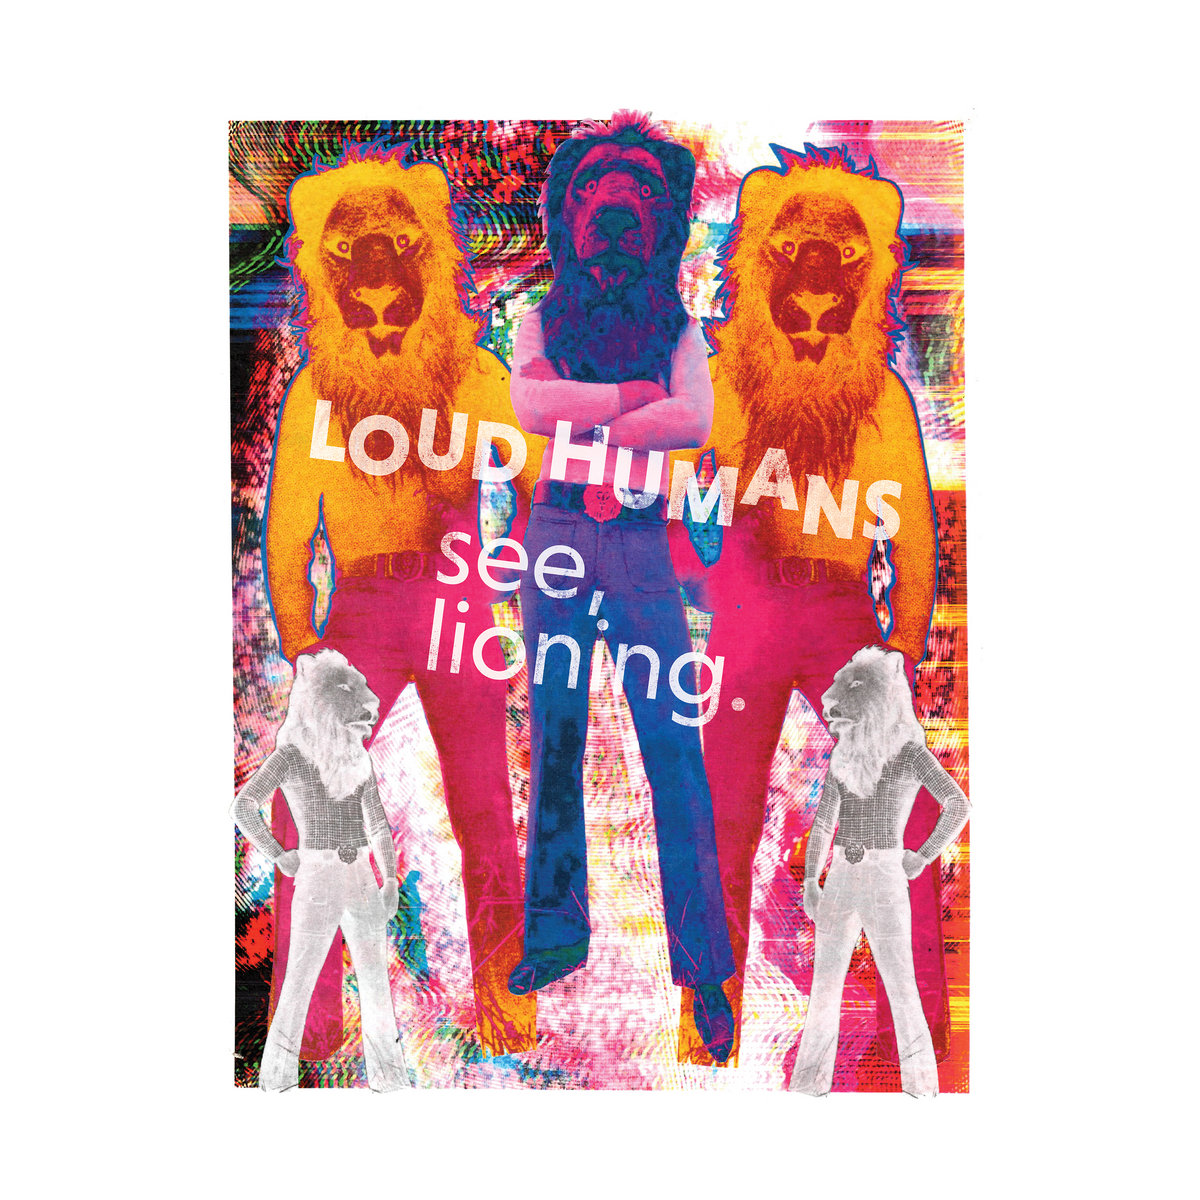 see, lioning EP by Loud Humans